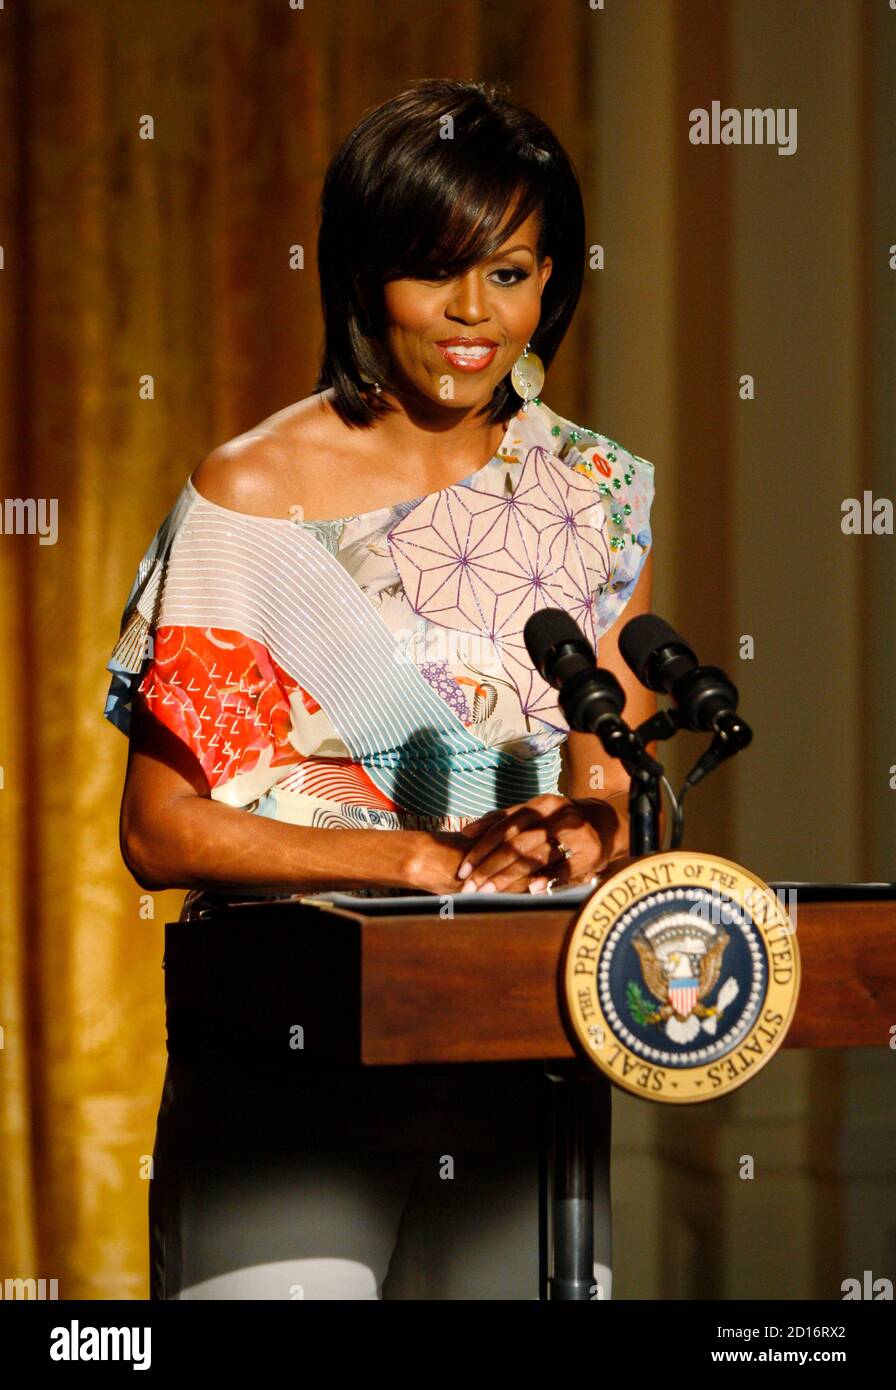 U.S. first lady Michelle Obama speaks at the start of an evening of poetry, music and spoken word in the East Room of the White House in Washington, May 12, 2009.     REUTERS/Jason Reed         (UNITED STATES POLITICS) Stock Photo